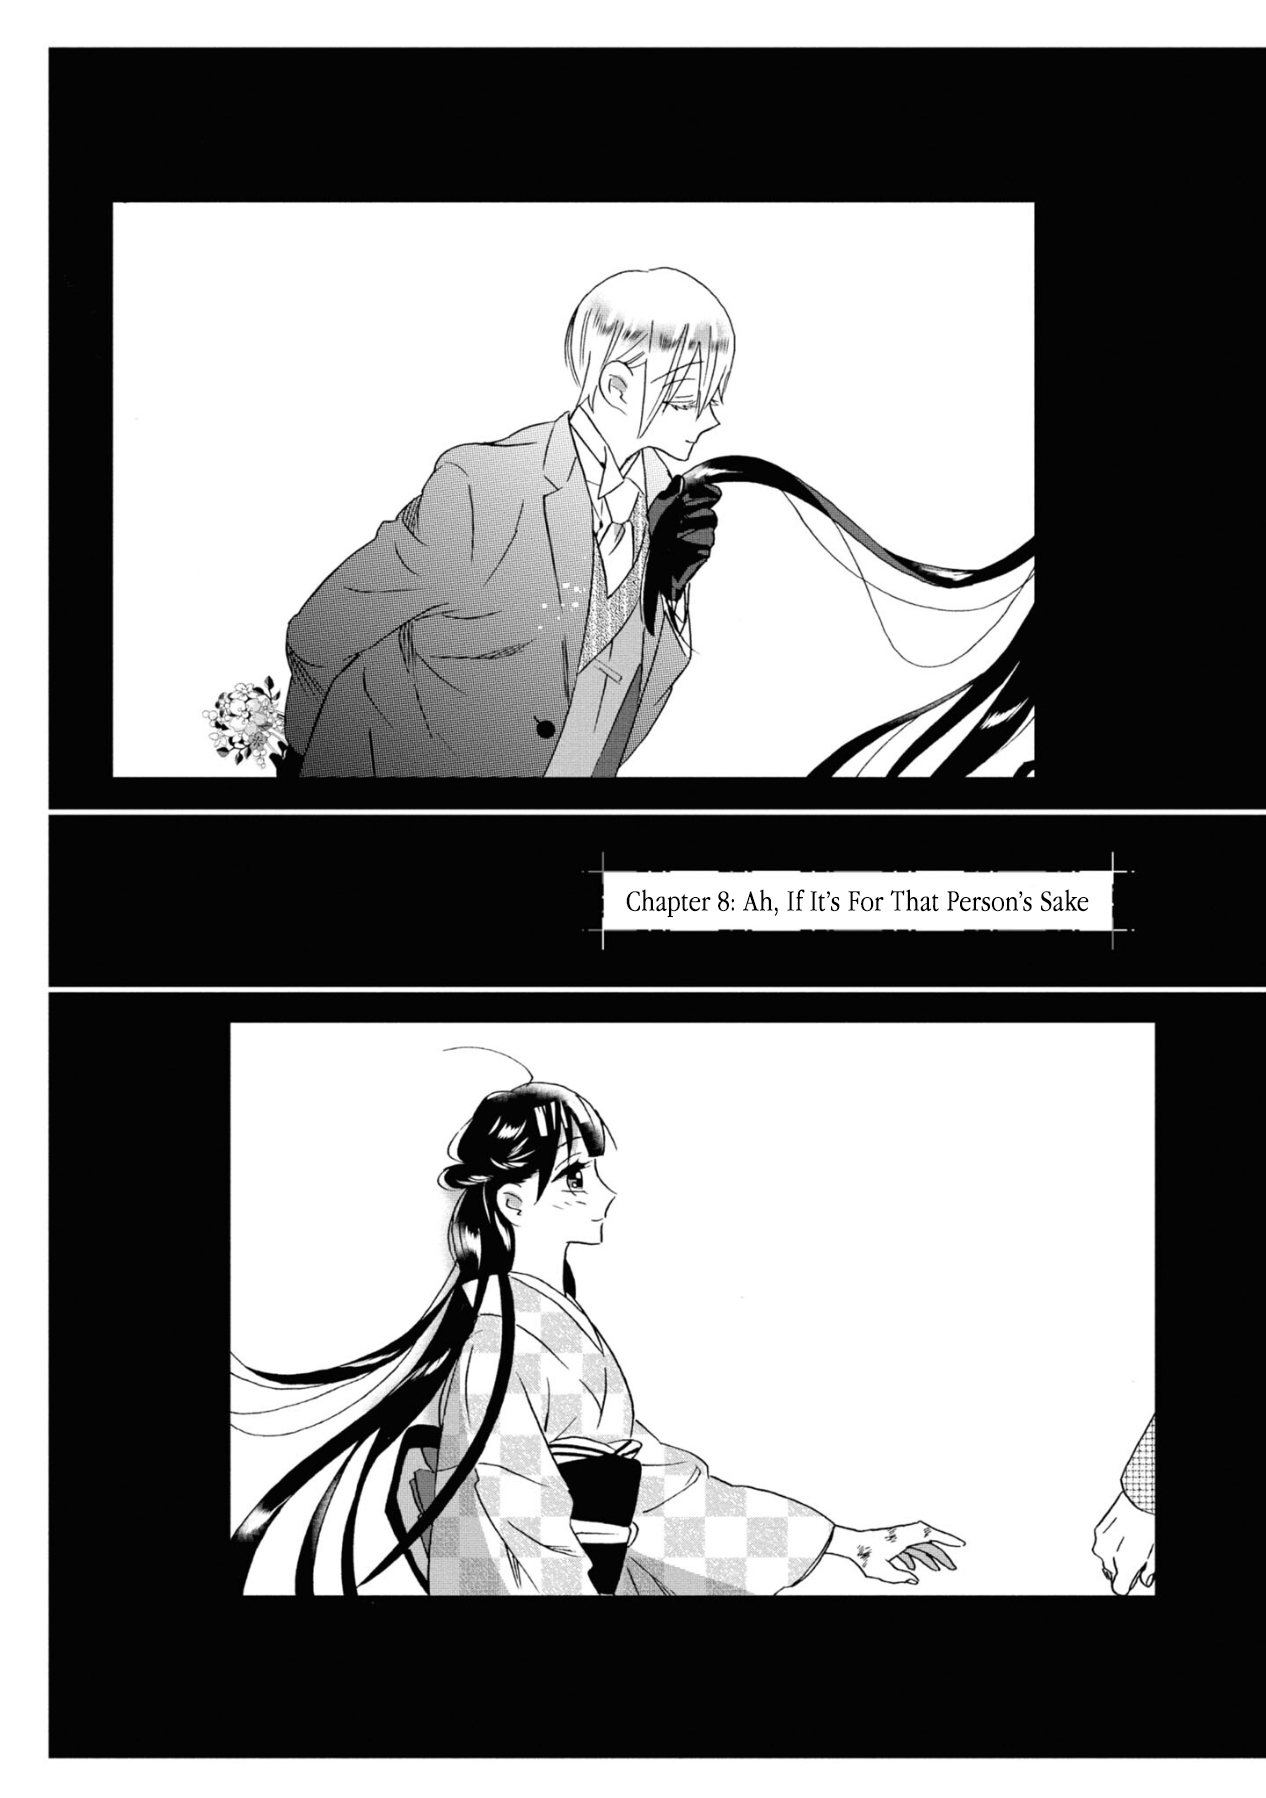 Kimi No Koe Vol.2 Chapter 8: Ah, If It's For That Person's Sake - Picture 2